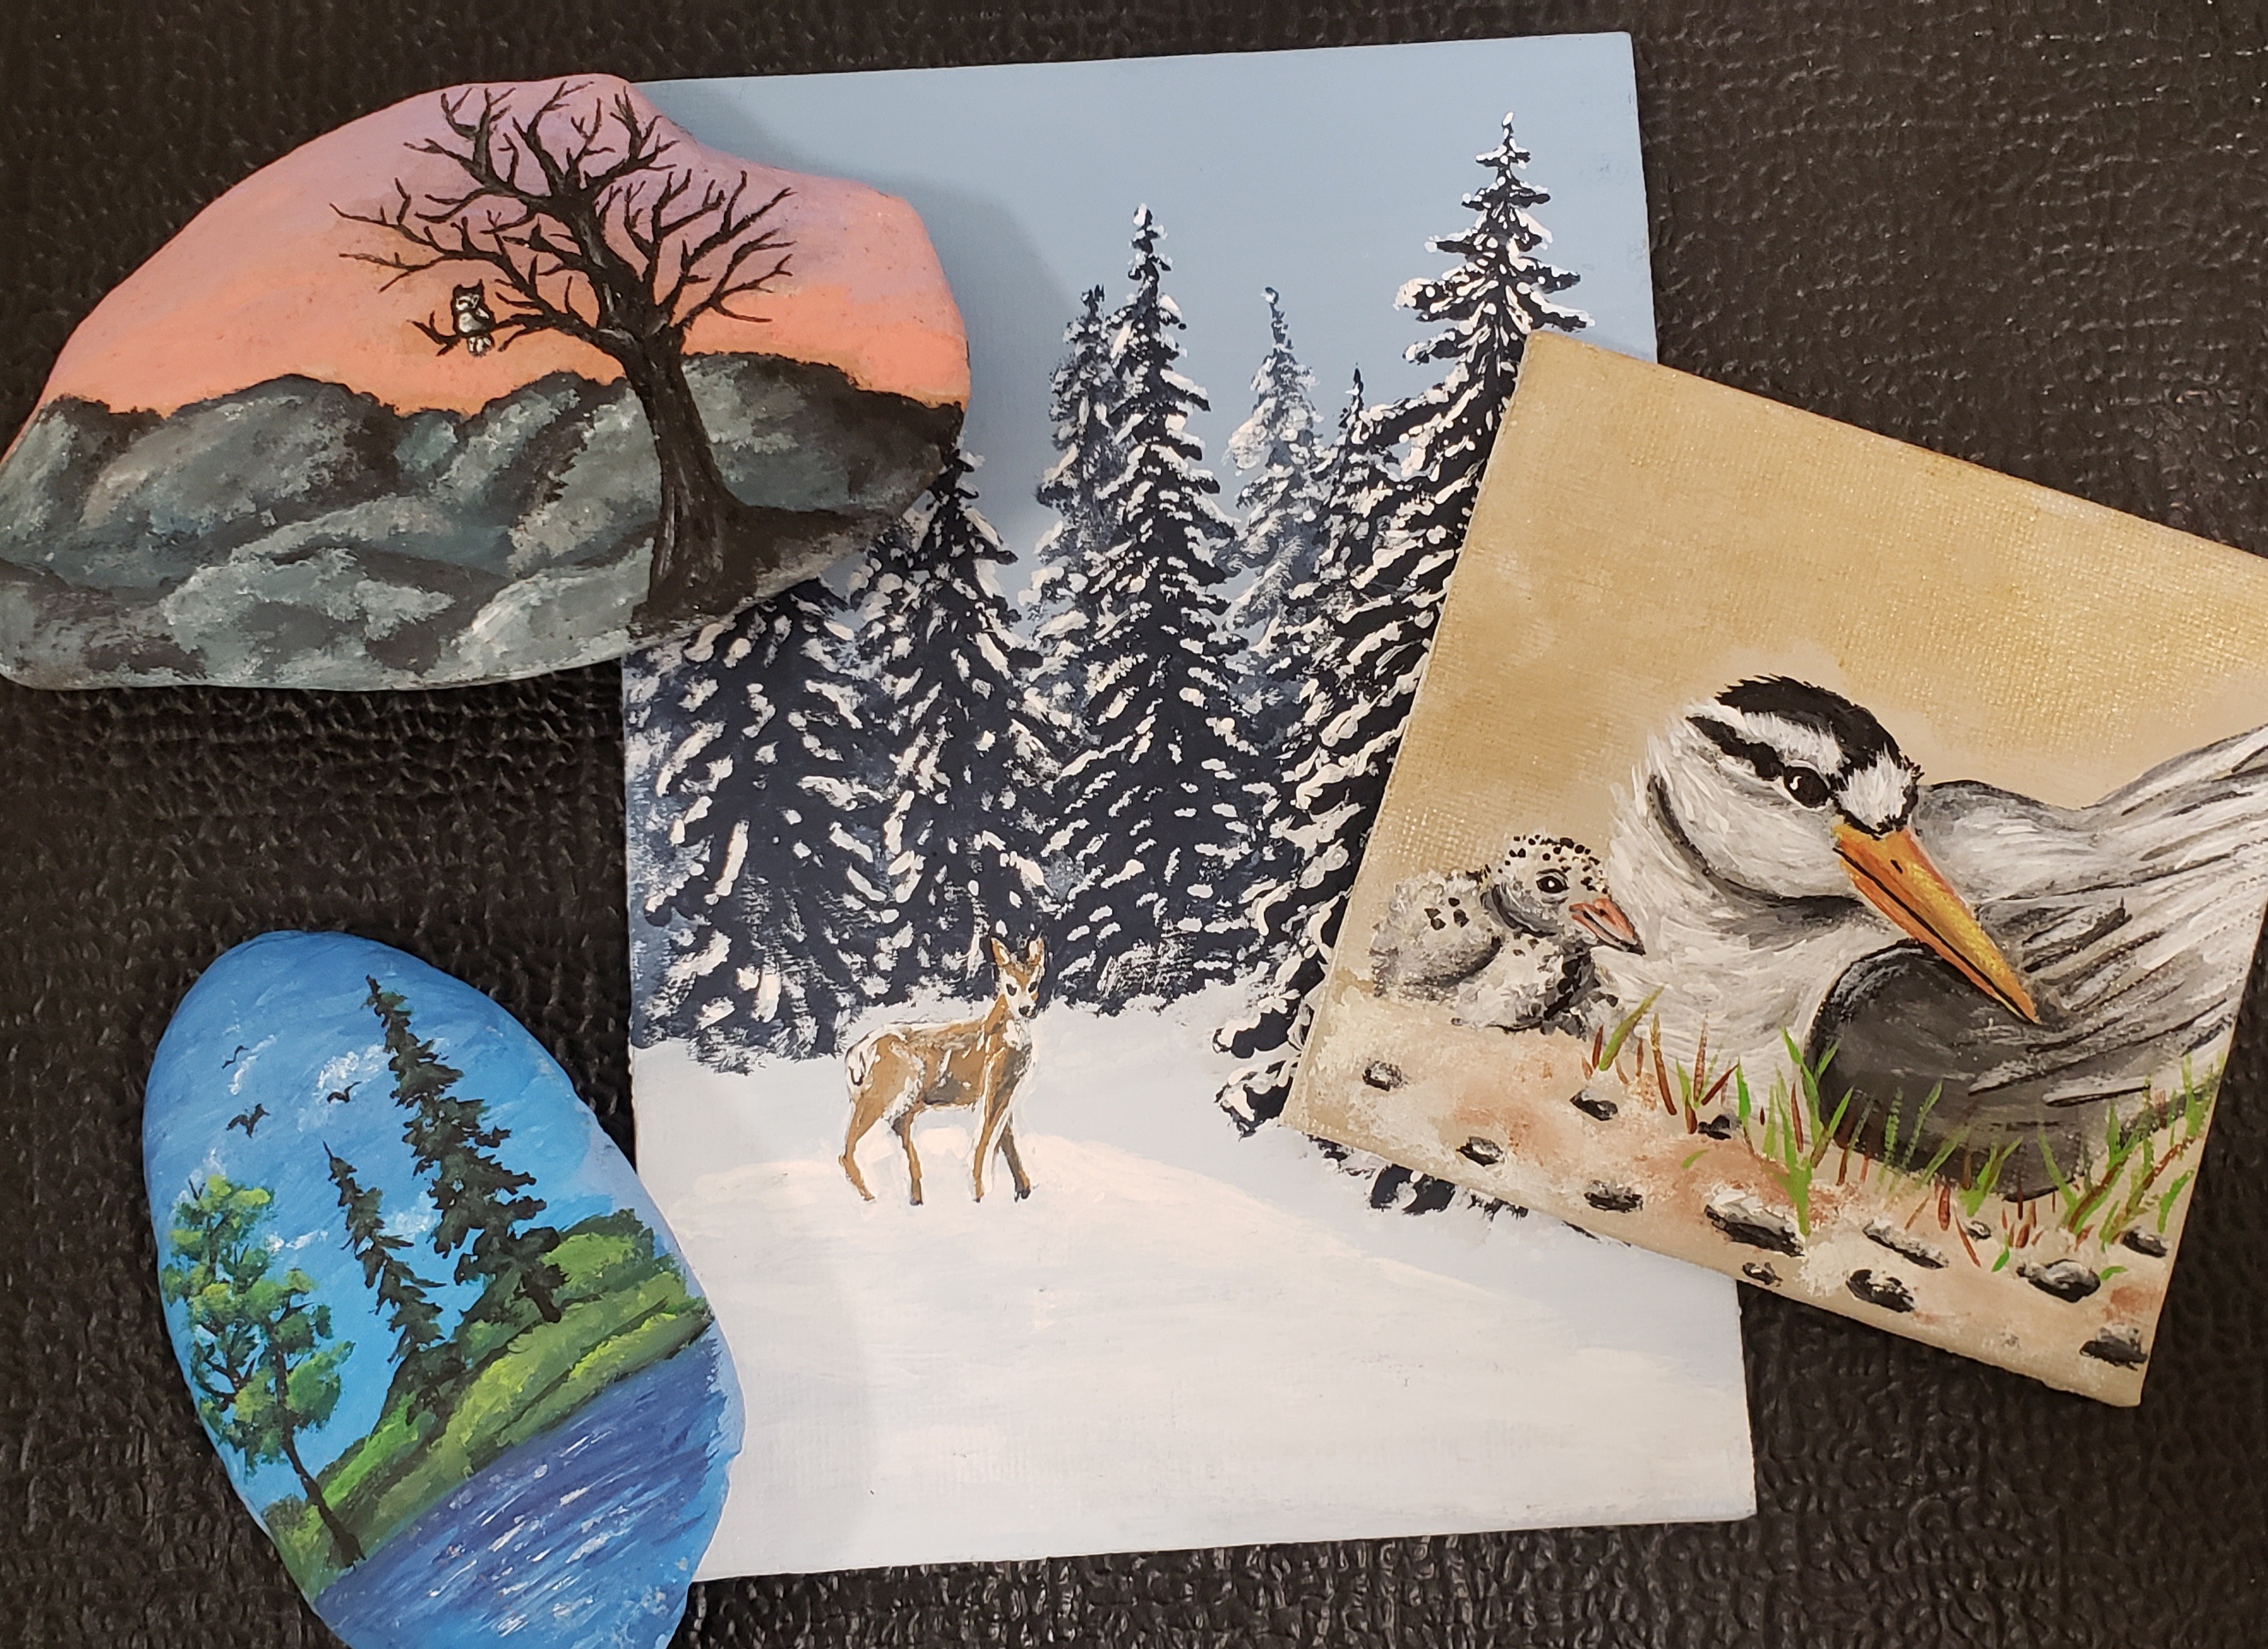 a selection of miniture paintings on canvases and rocks